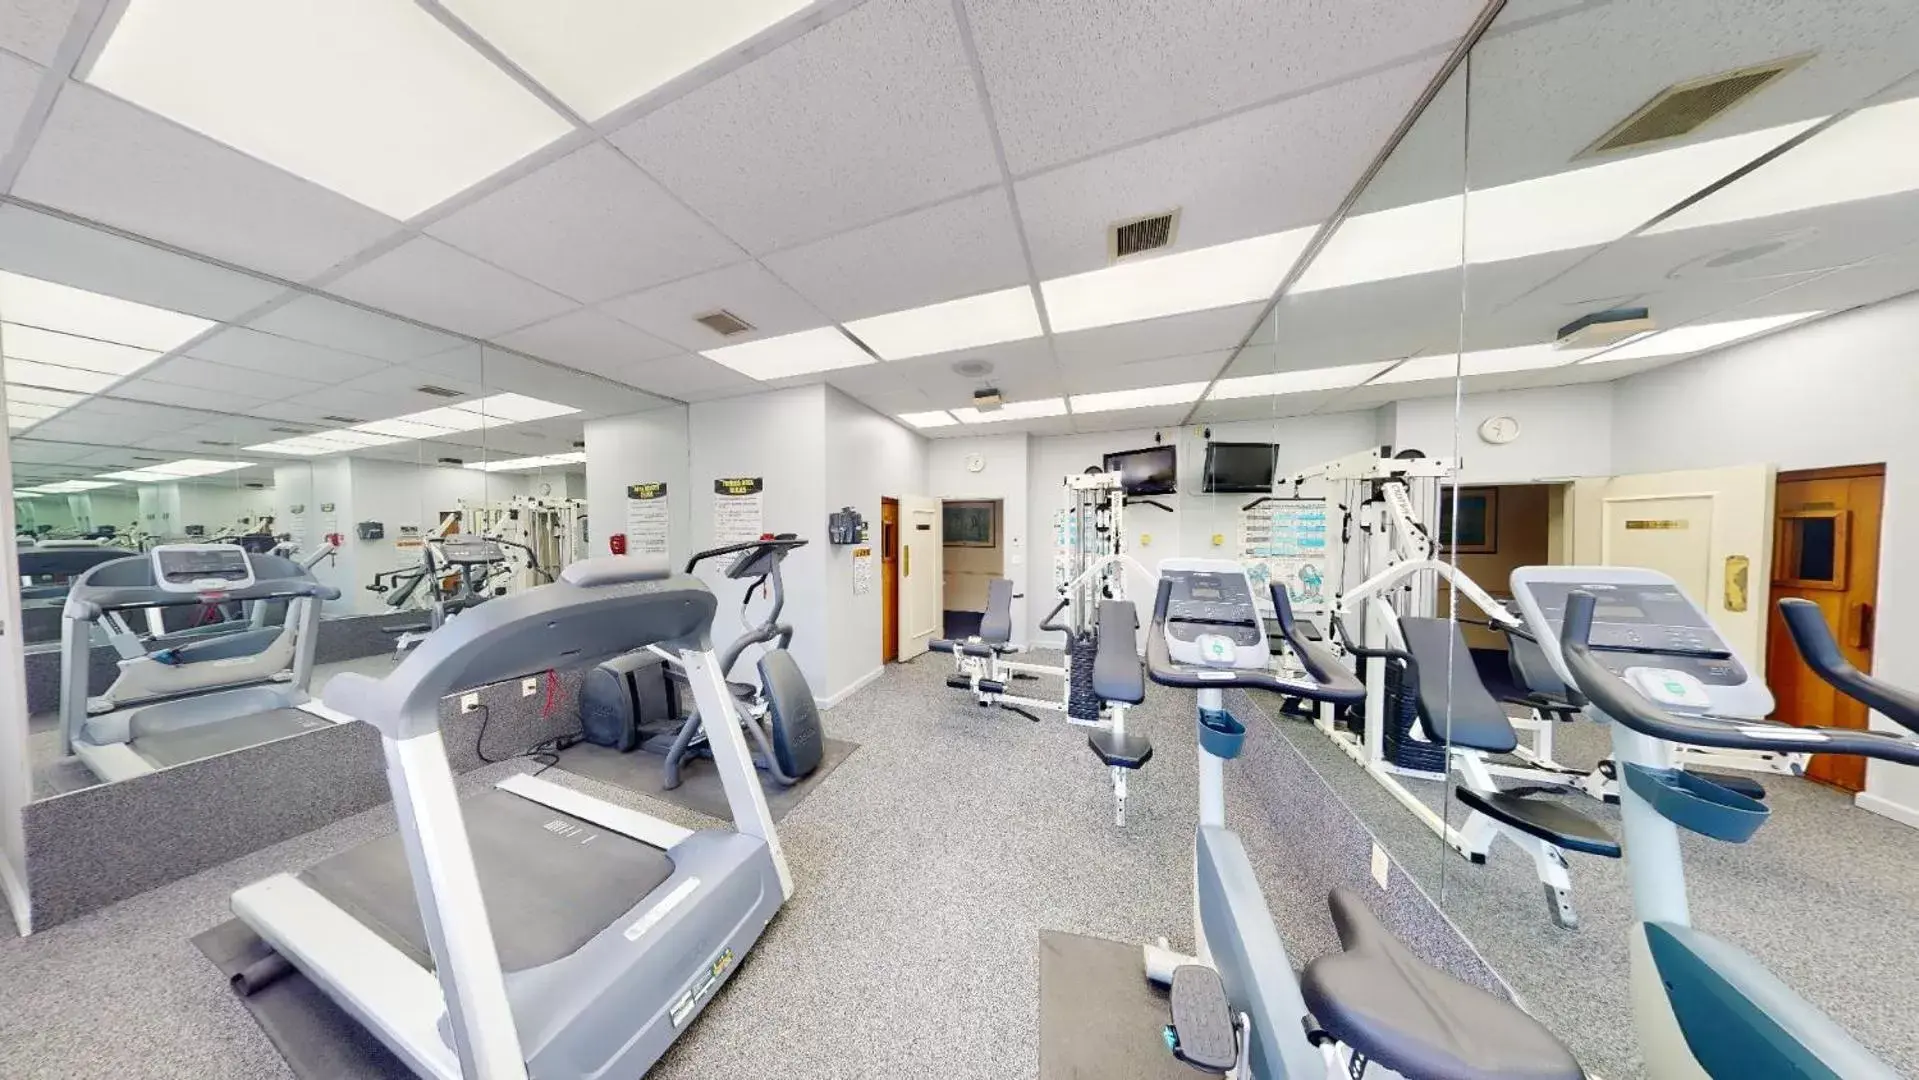 Fitness centre/facilities, Fitness Center/Facilities in Avon Old Farms Hotel